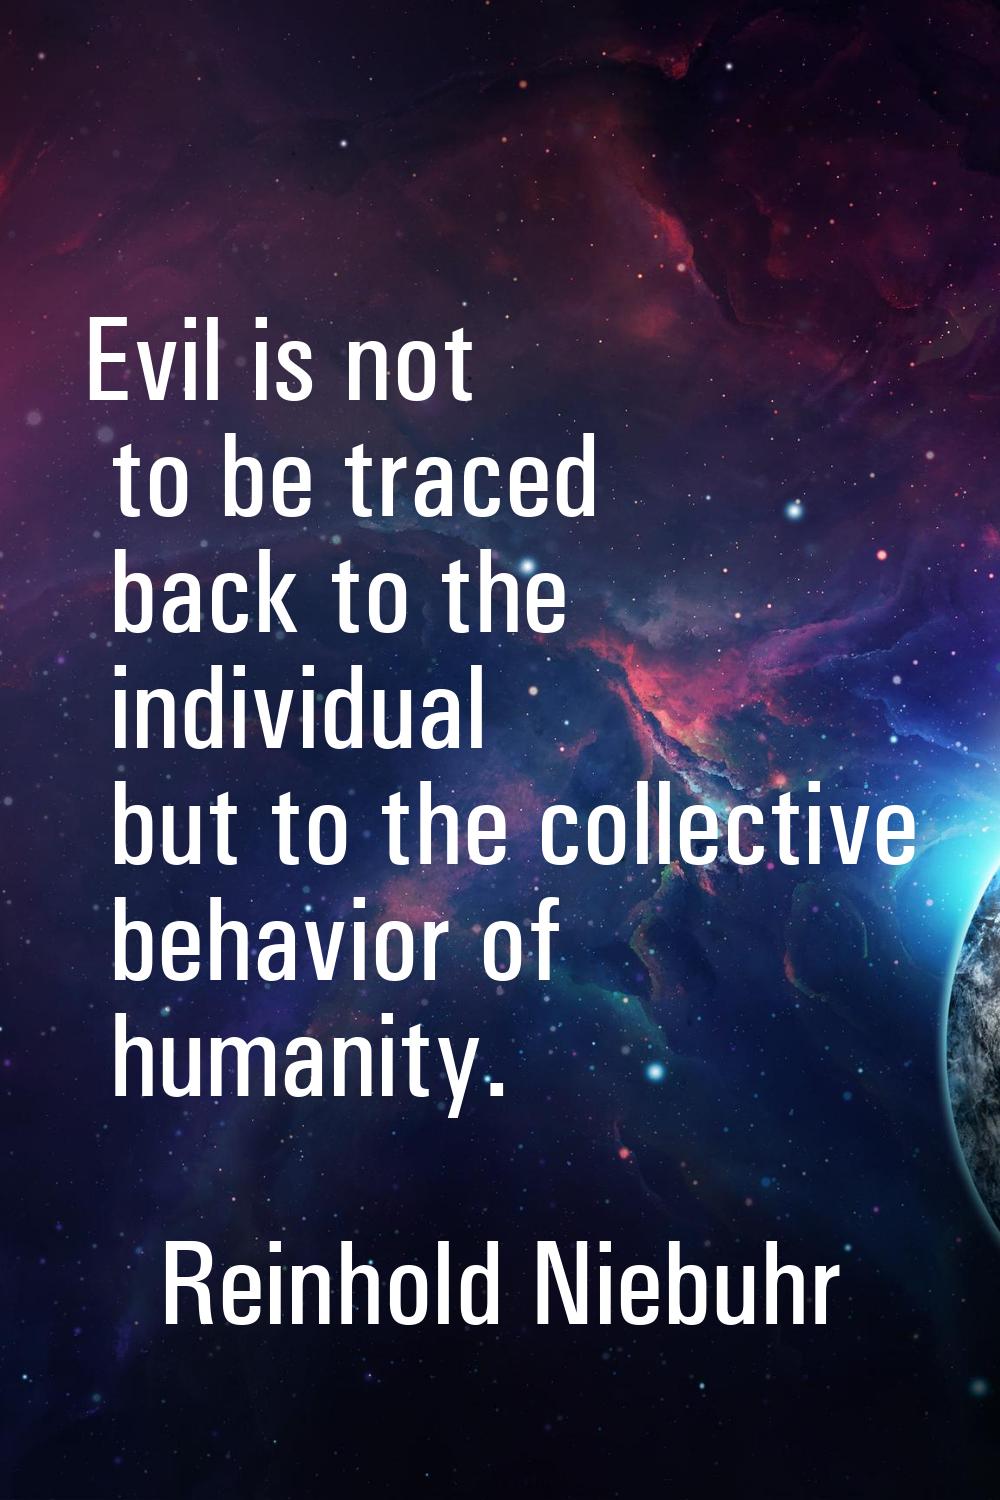 Evil is not to be traced back to the individual but to the collective behavior of humanity.